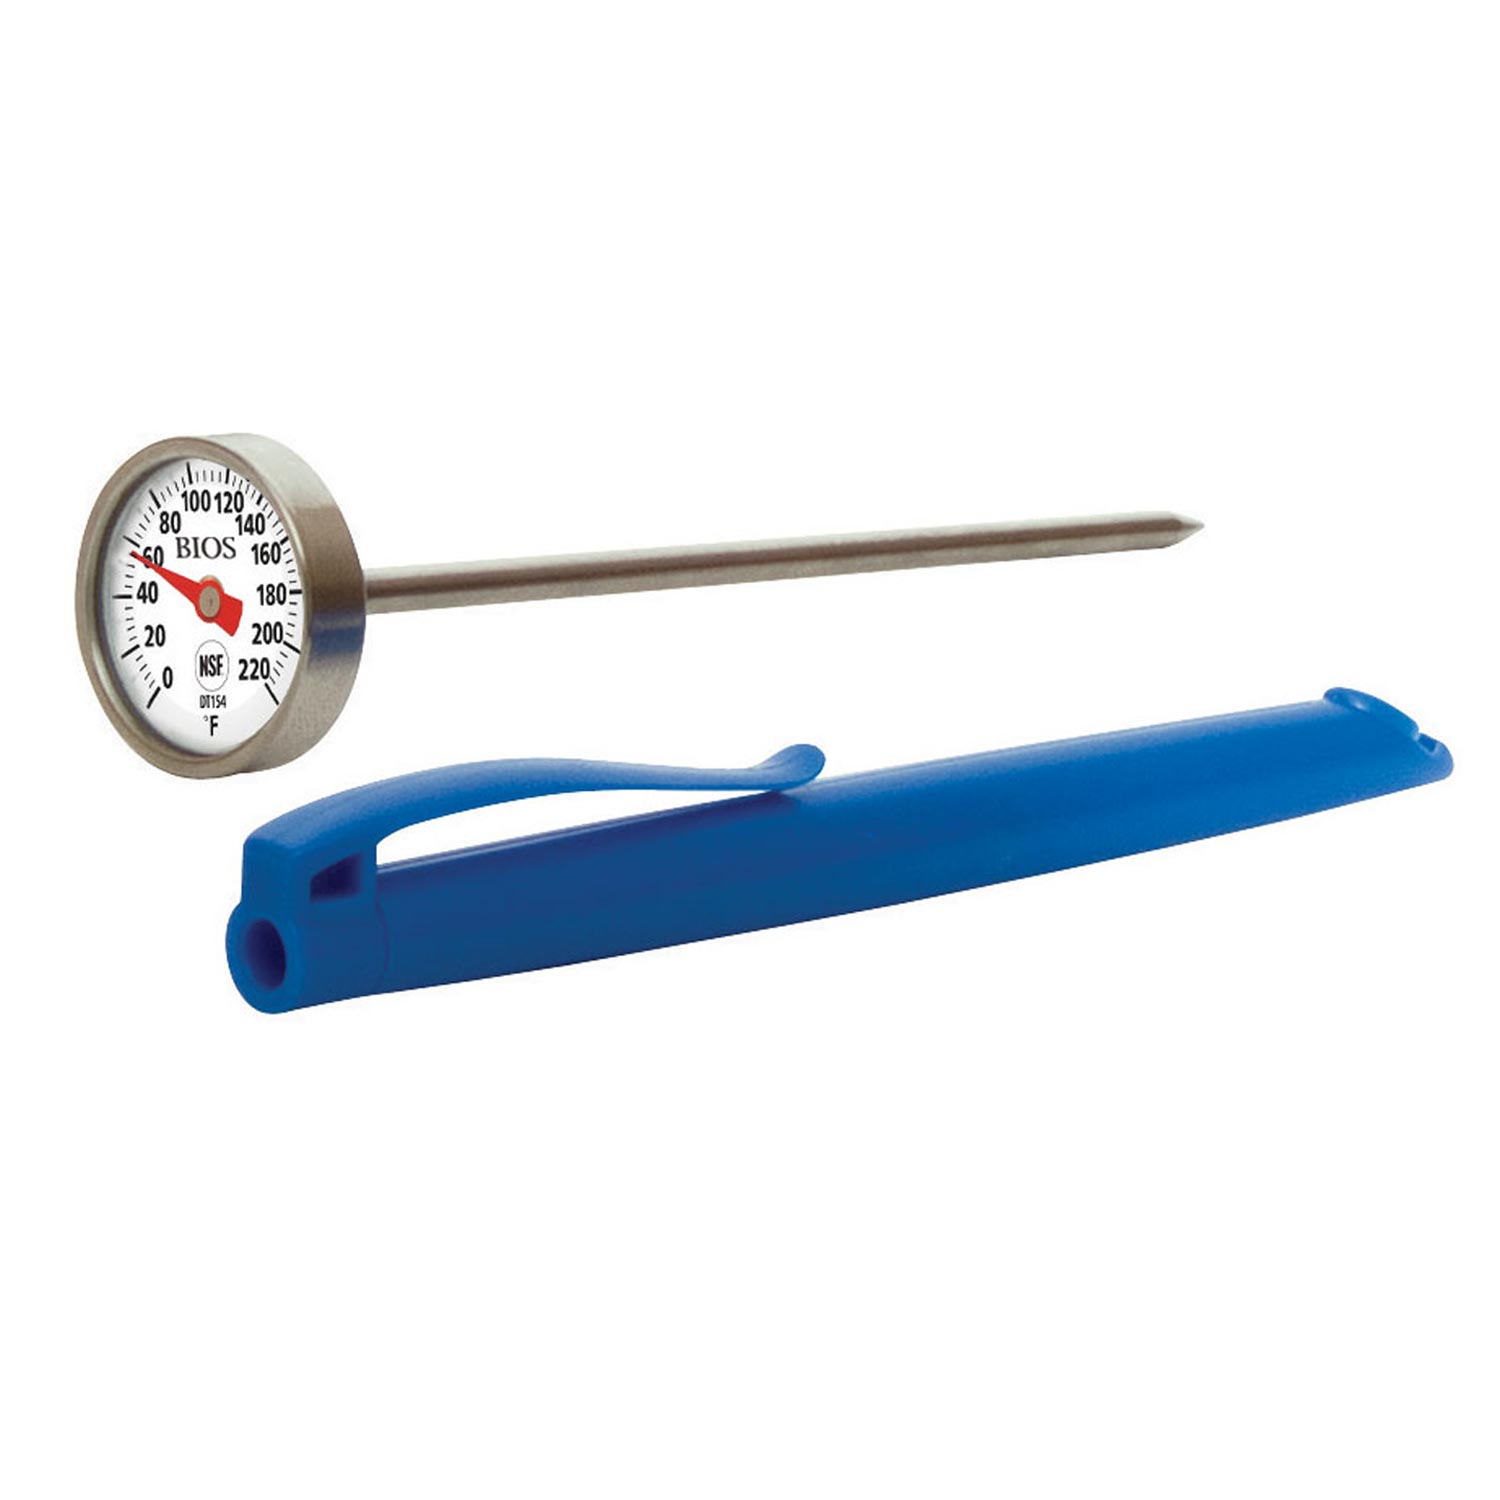 Bios Dial Pocket Thermometer - Blue